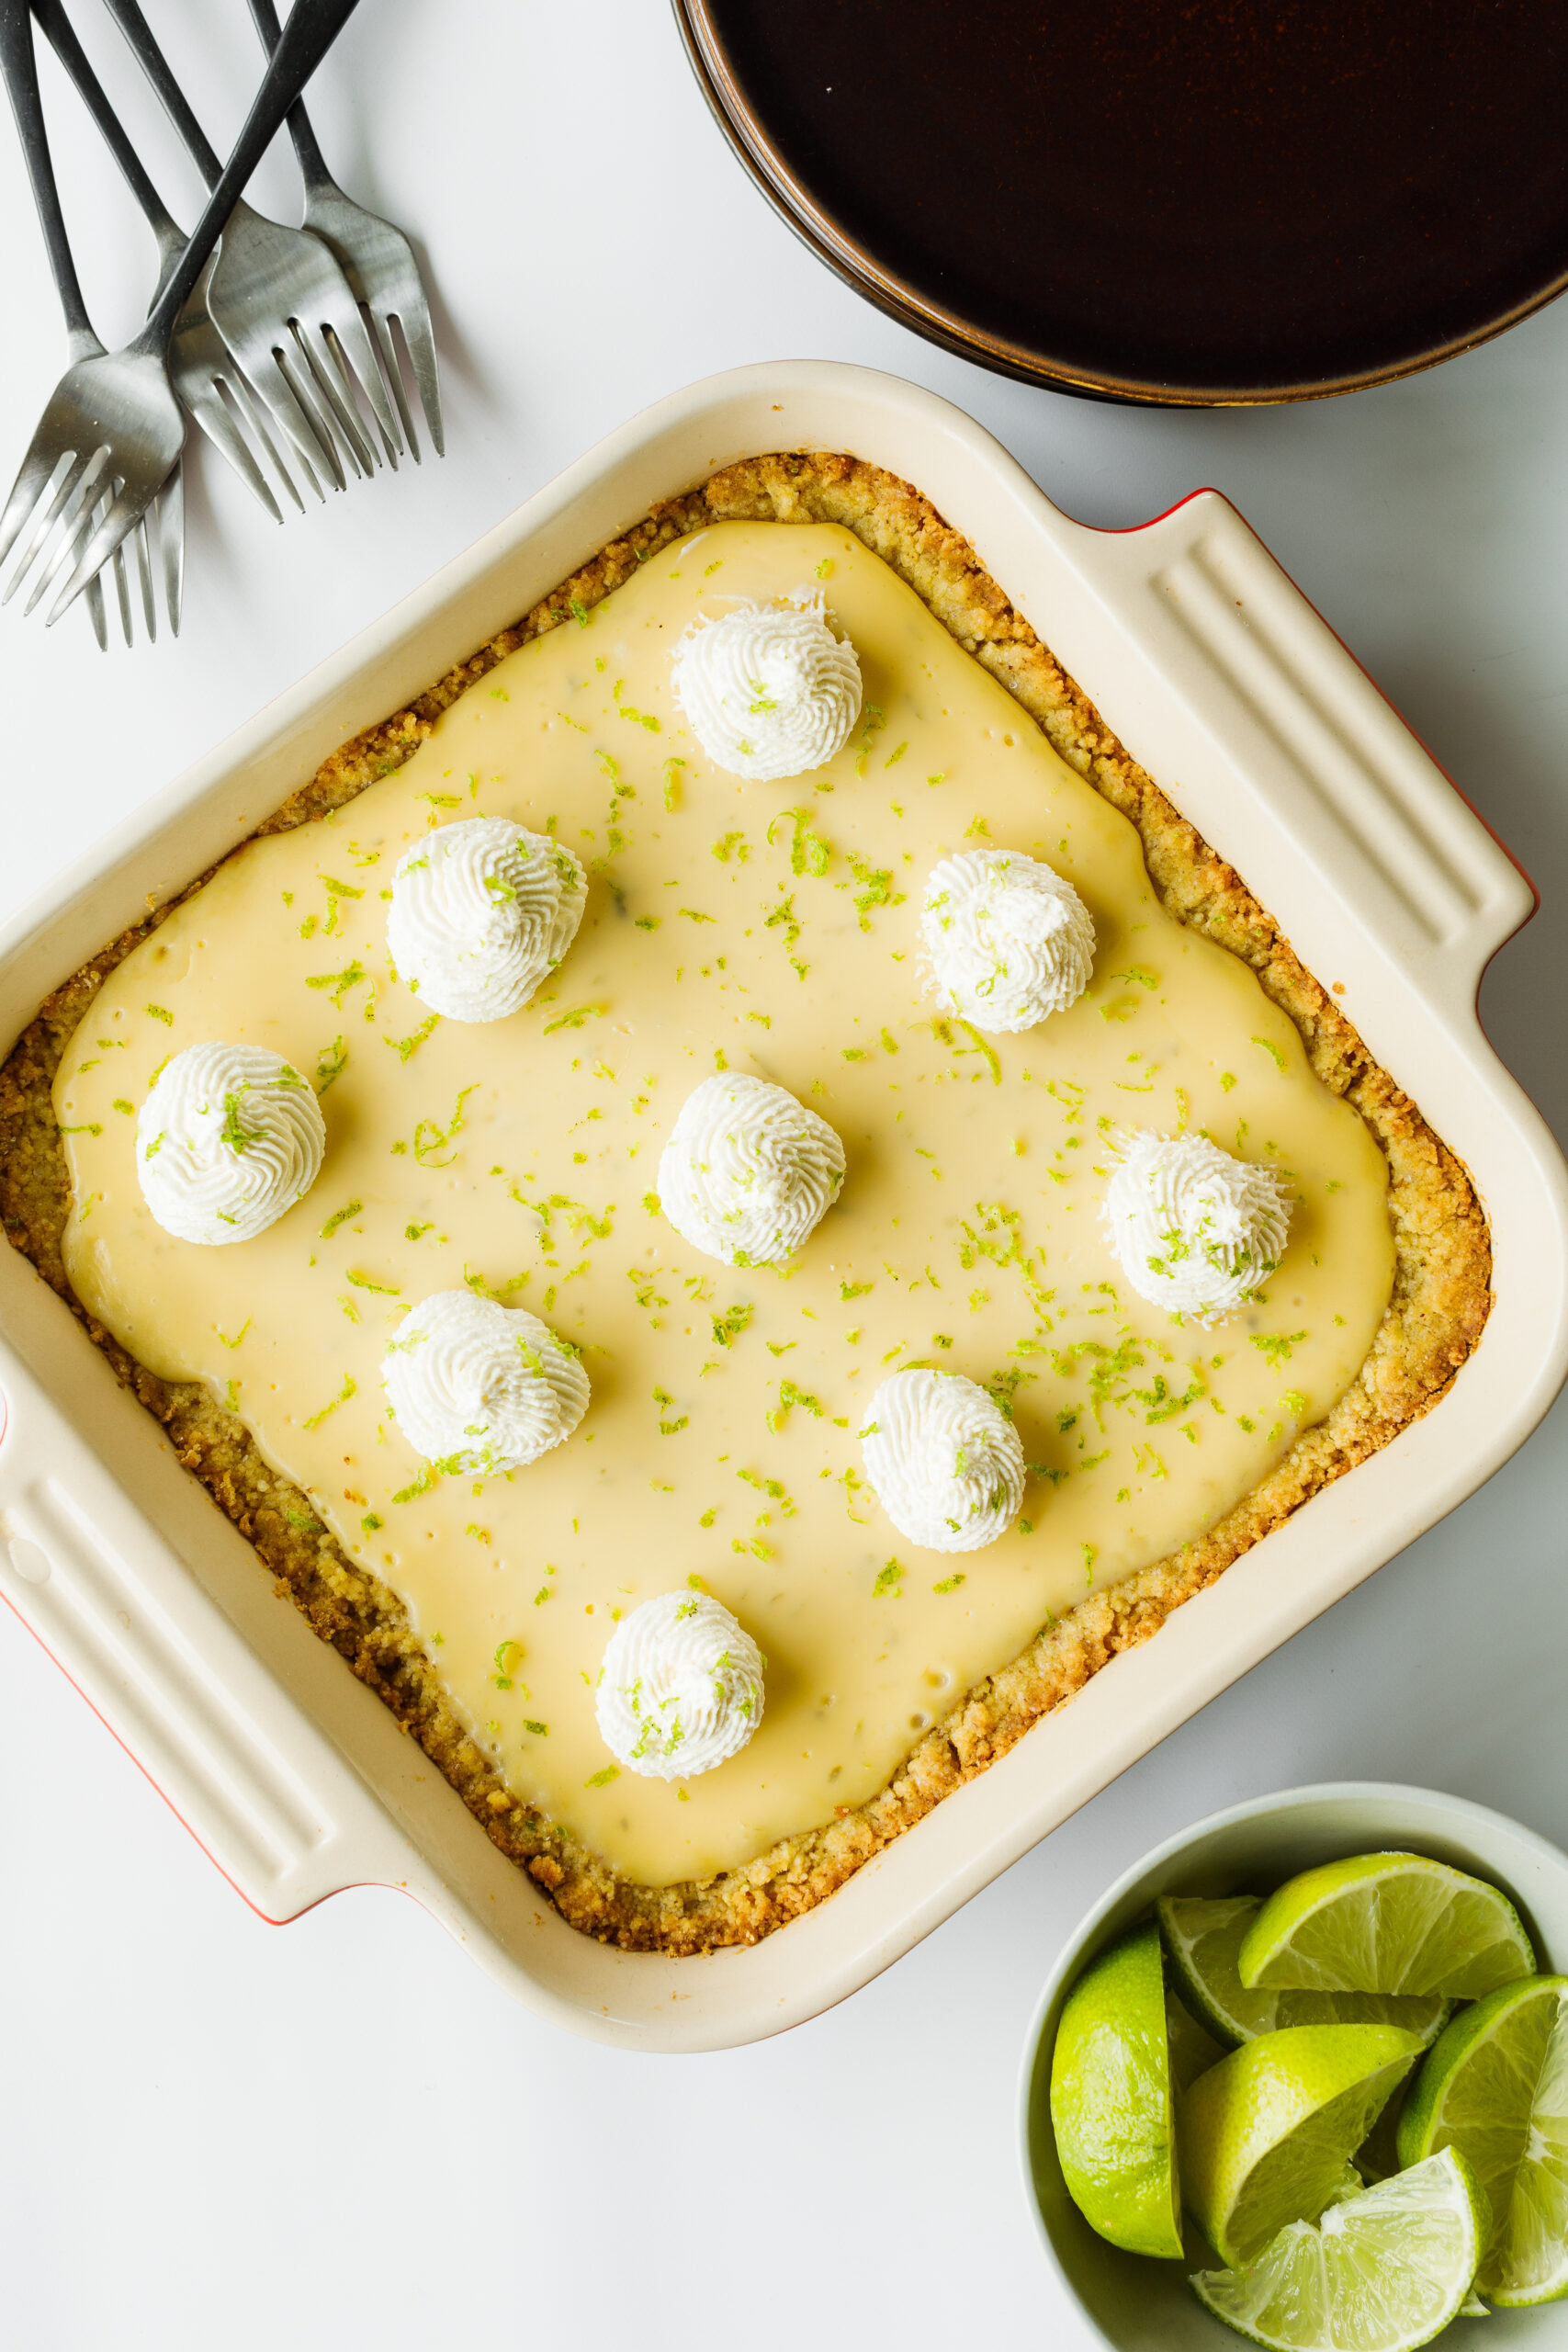 The Key Lime Pie Bars, surrounded by forks, slices limes, and serving plates